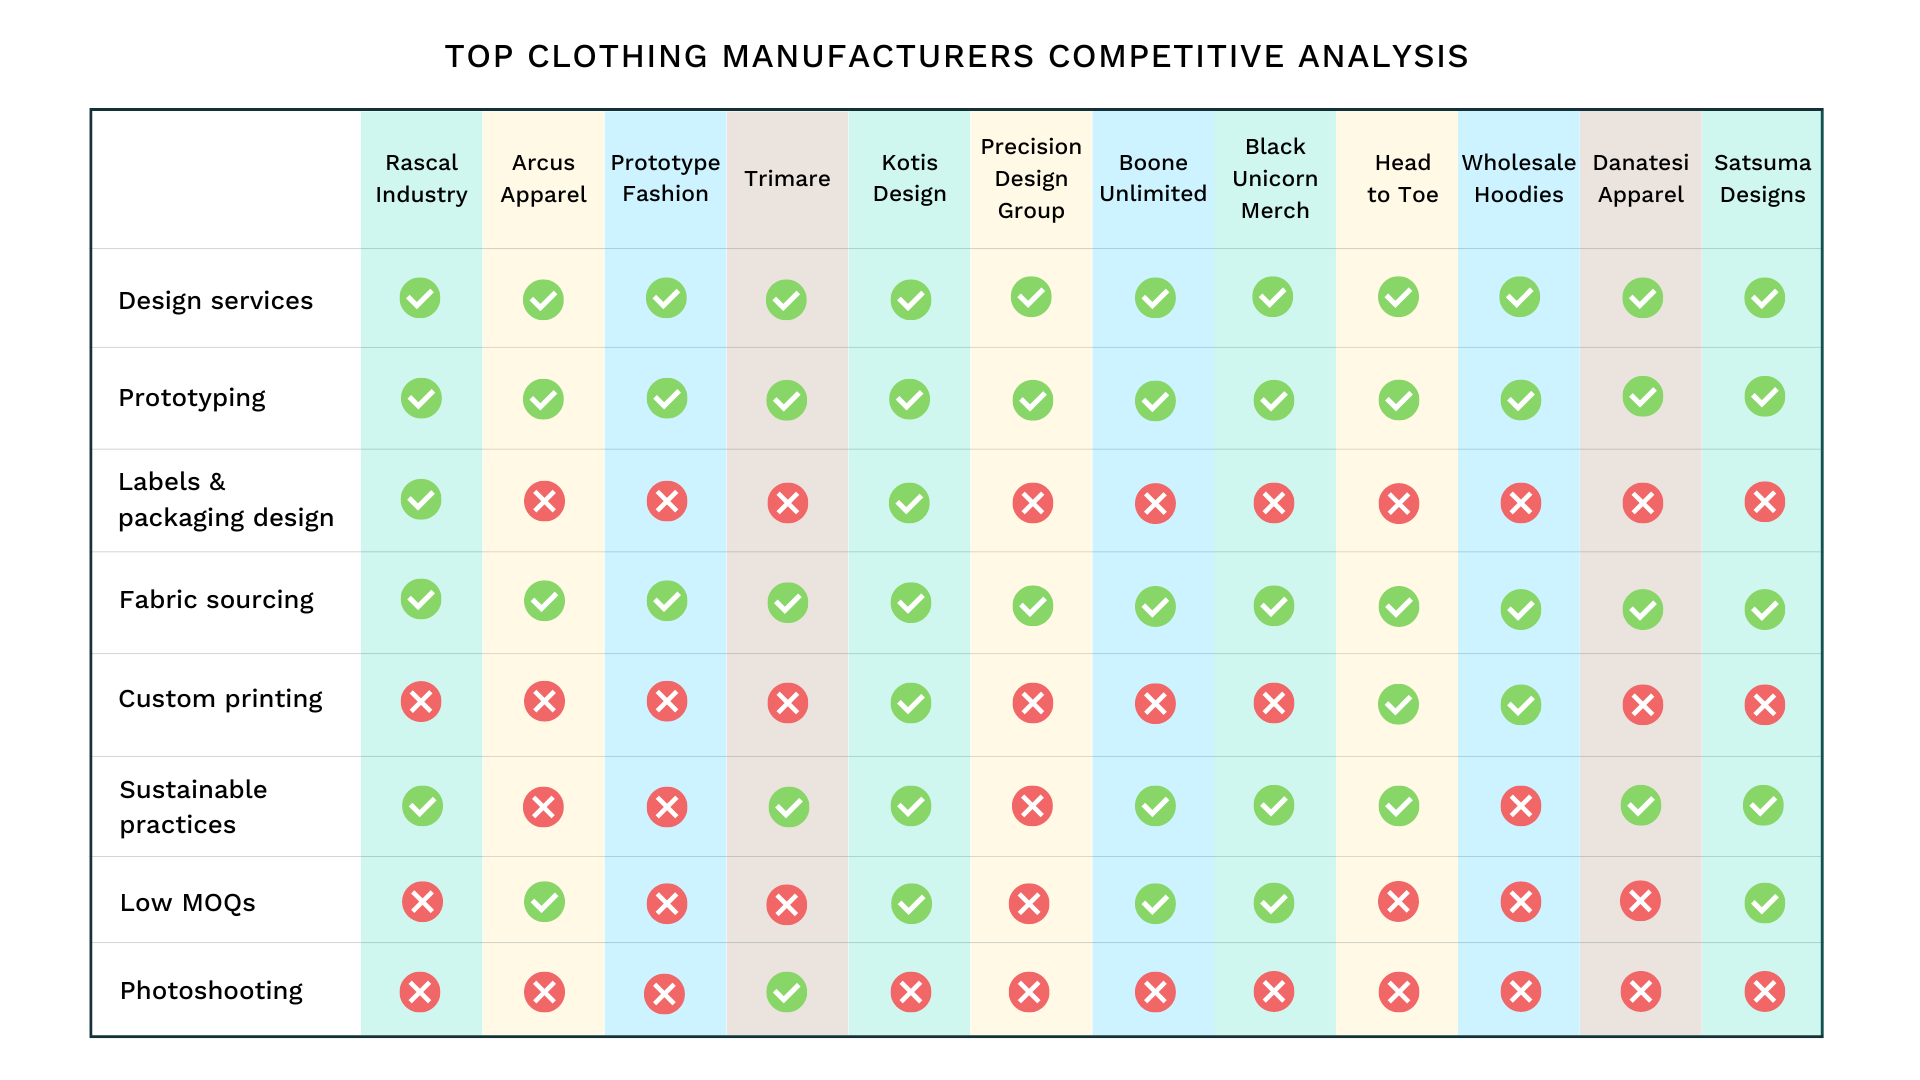 Top Clothing Manufactureres chart with competative analysis